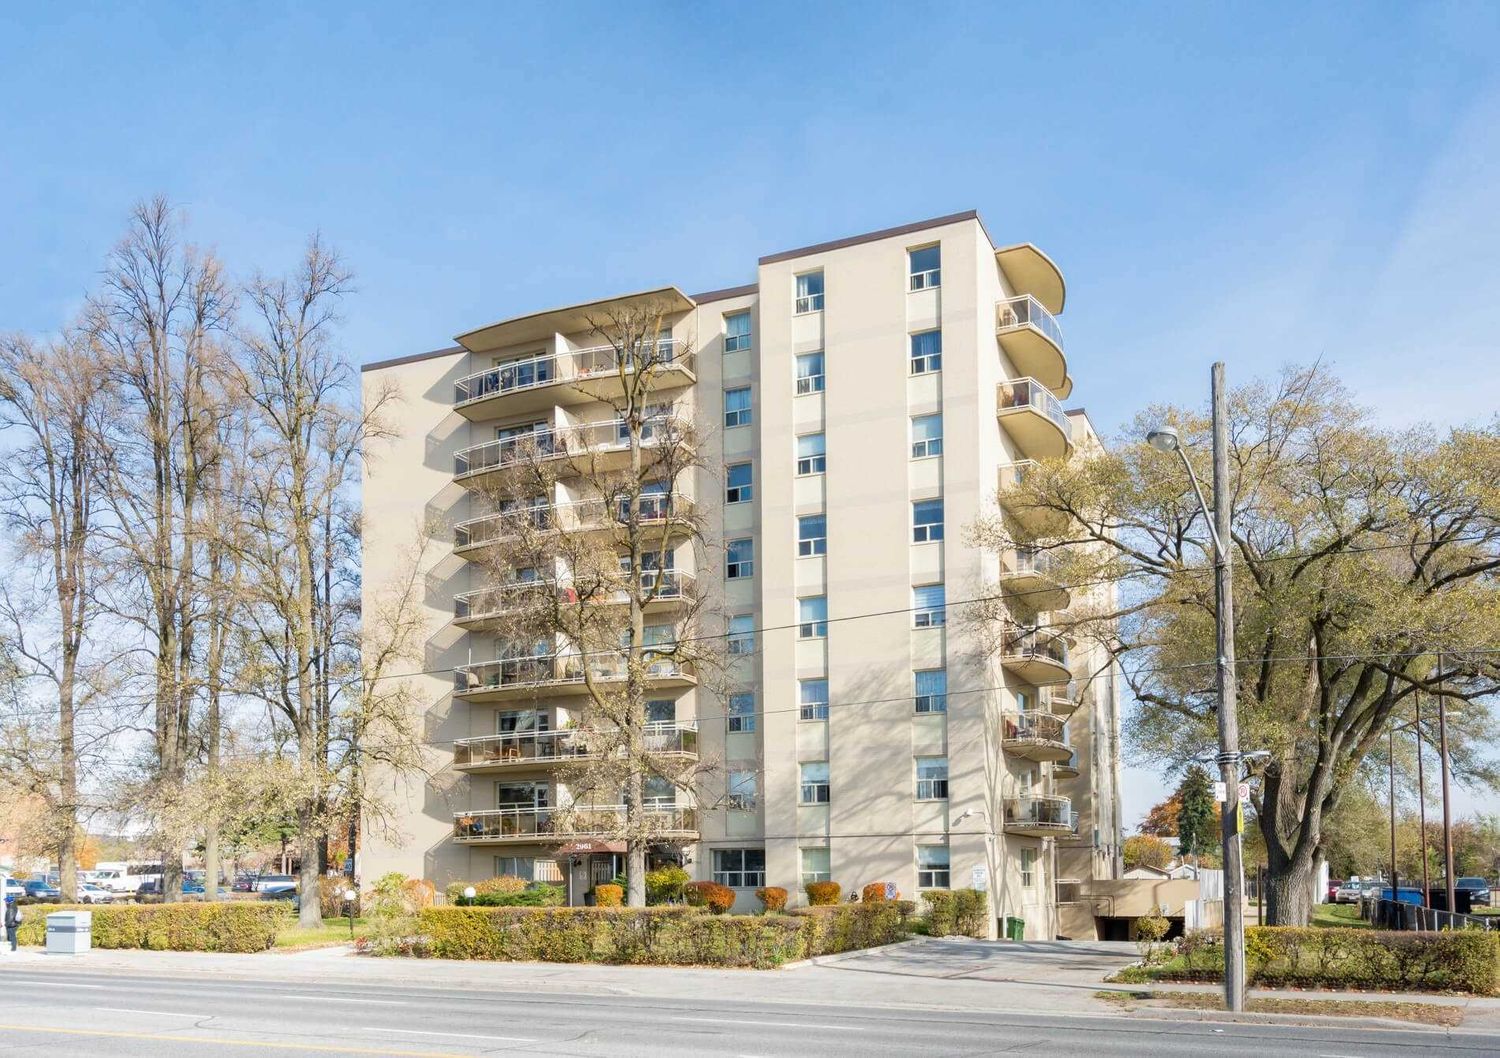 2961 Dufferin Street. Yorkdale Court Condos is located in  North York, Toronto - image #1 of 2